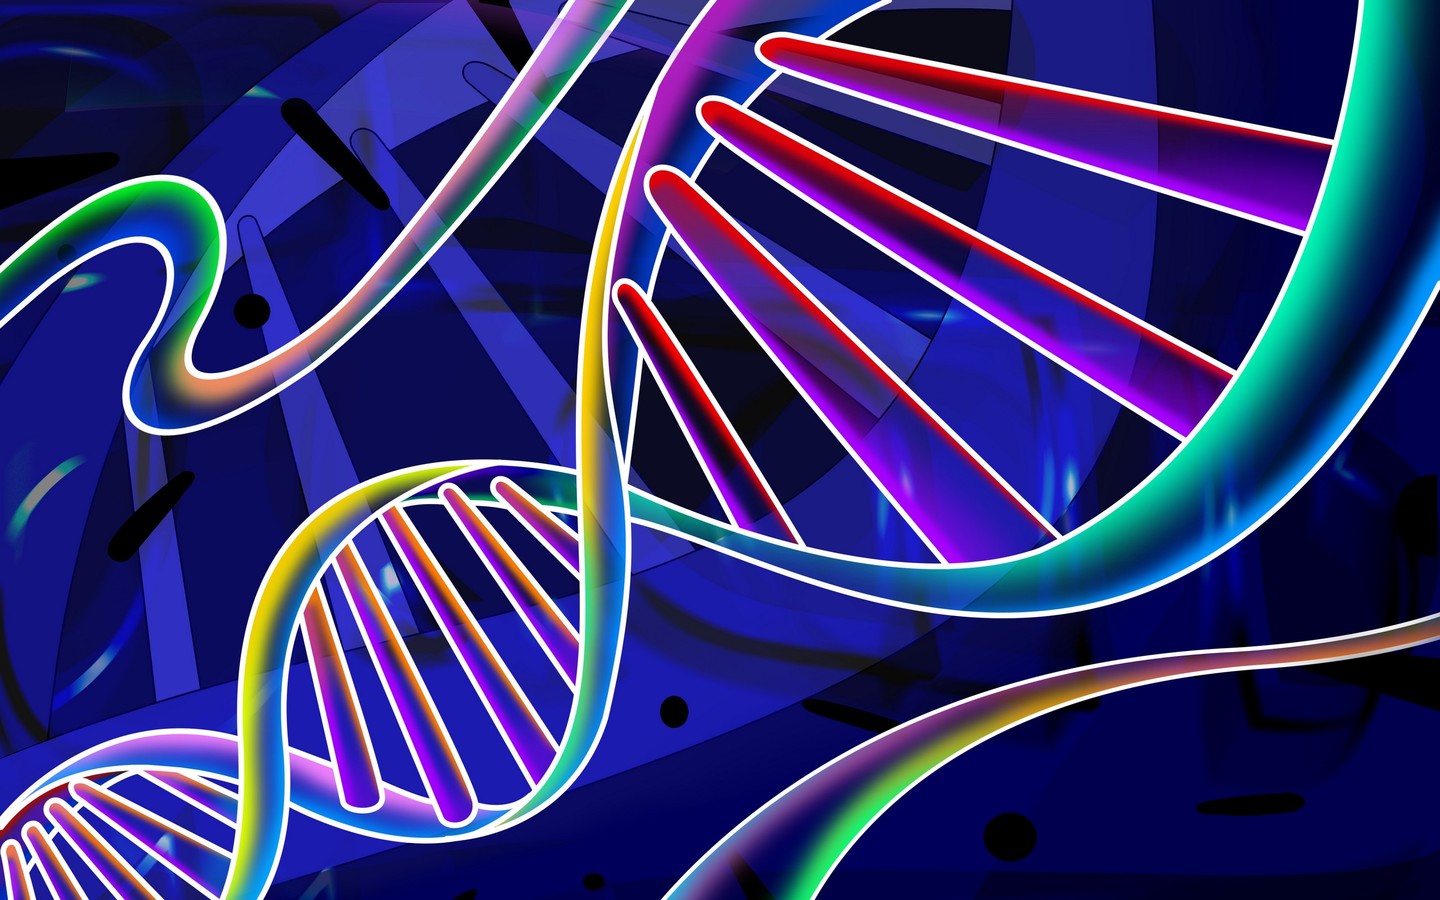 Download: HTC Droid DNA Wallpapers ~ iSozial